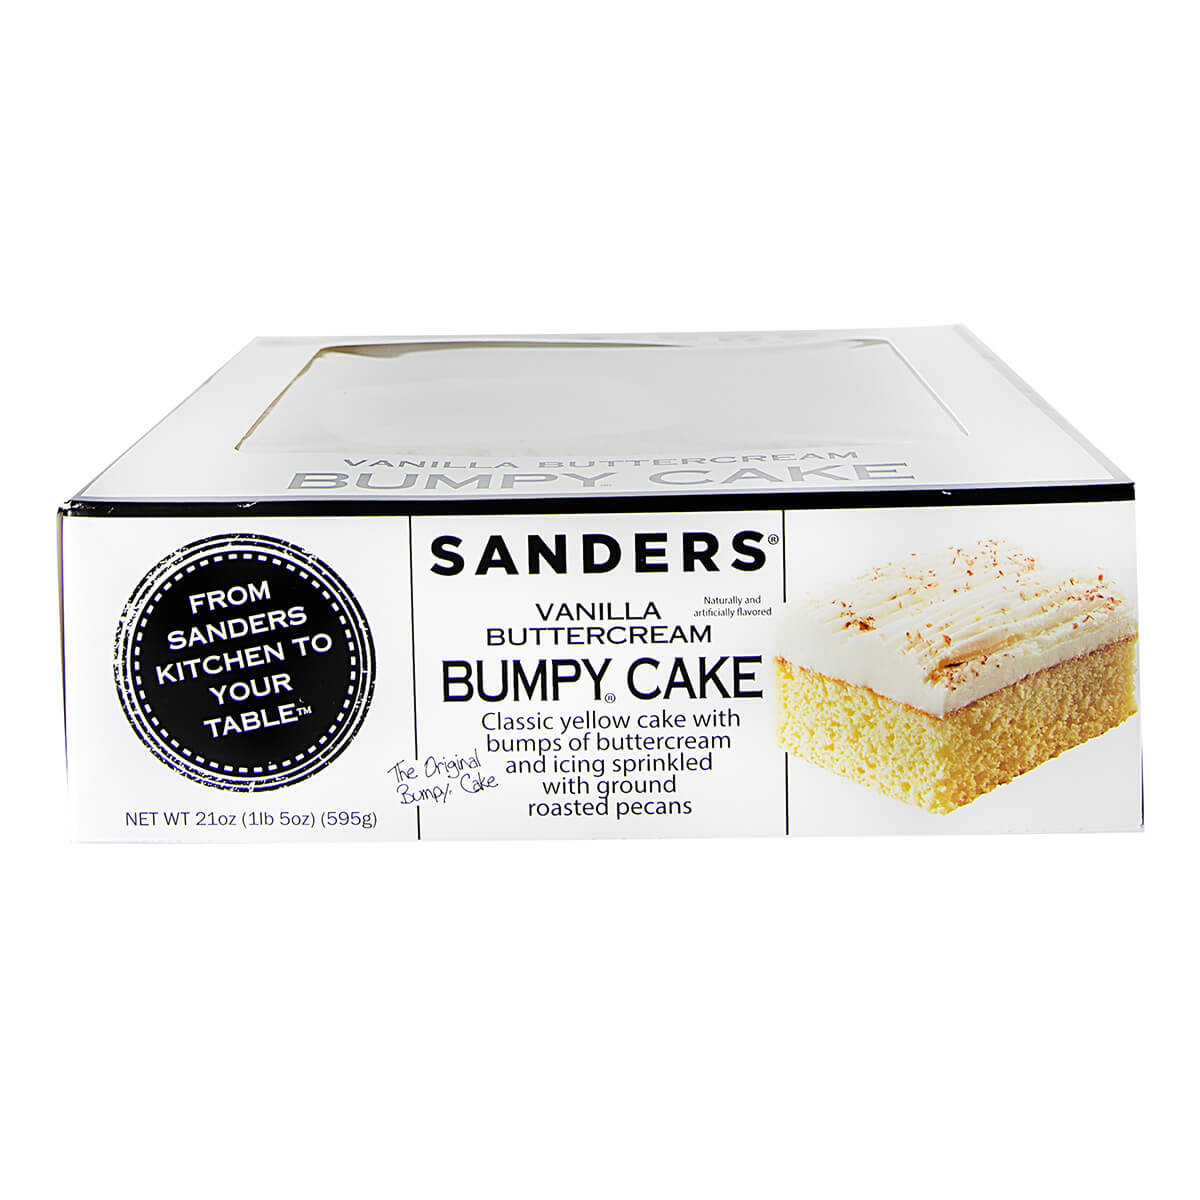 Sanders - Have you heard the news? Mini Bumpy Cakes are now available at  Sanders Chocolate & Ice Cream Shops! This is not an #AprilFools joke! It's  Bumpy Cake for 2, or